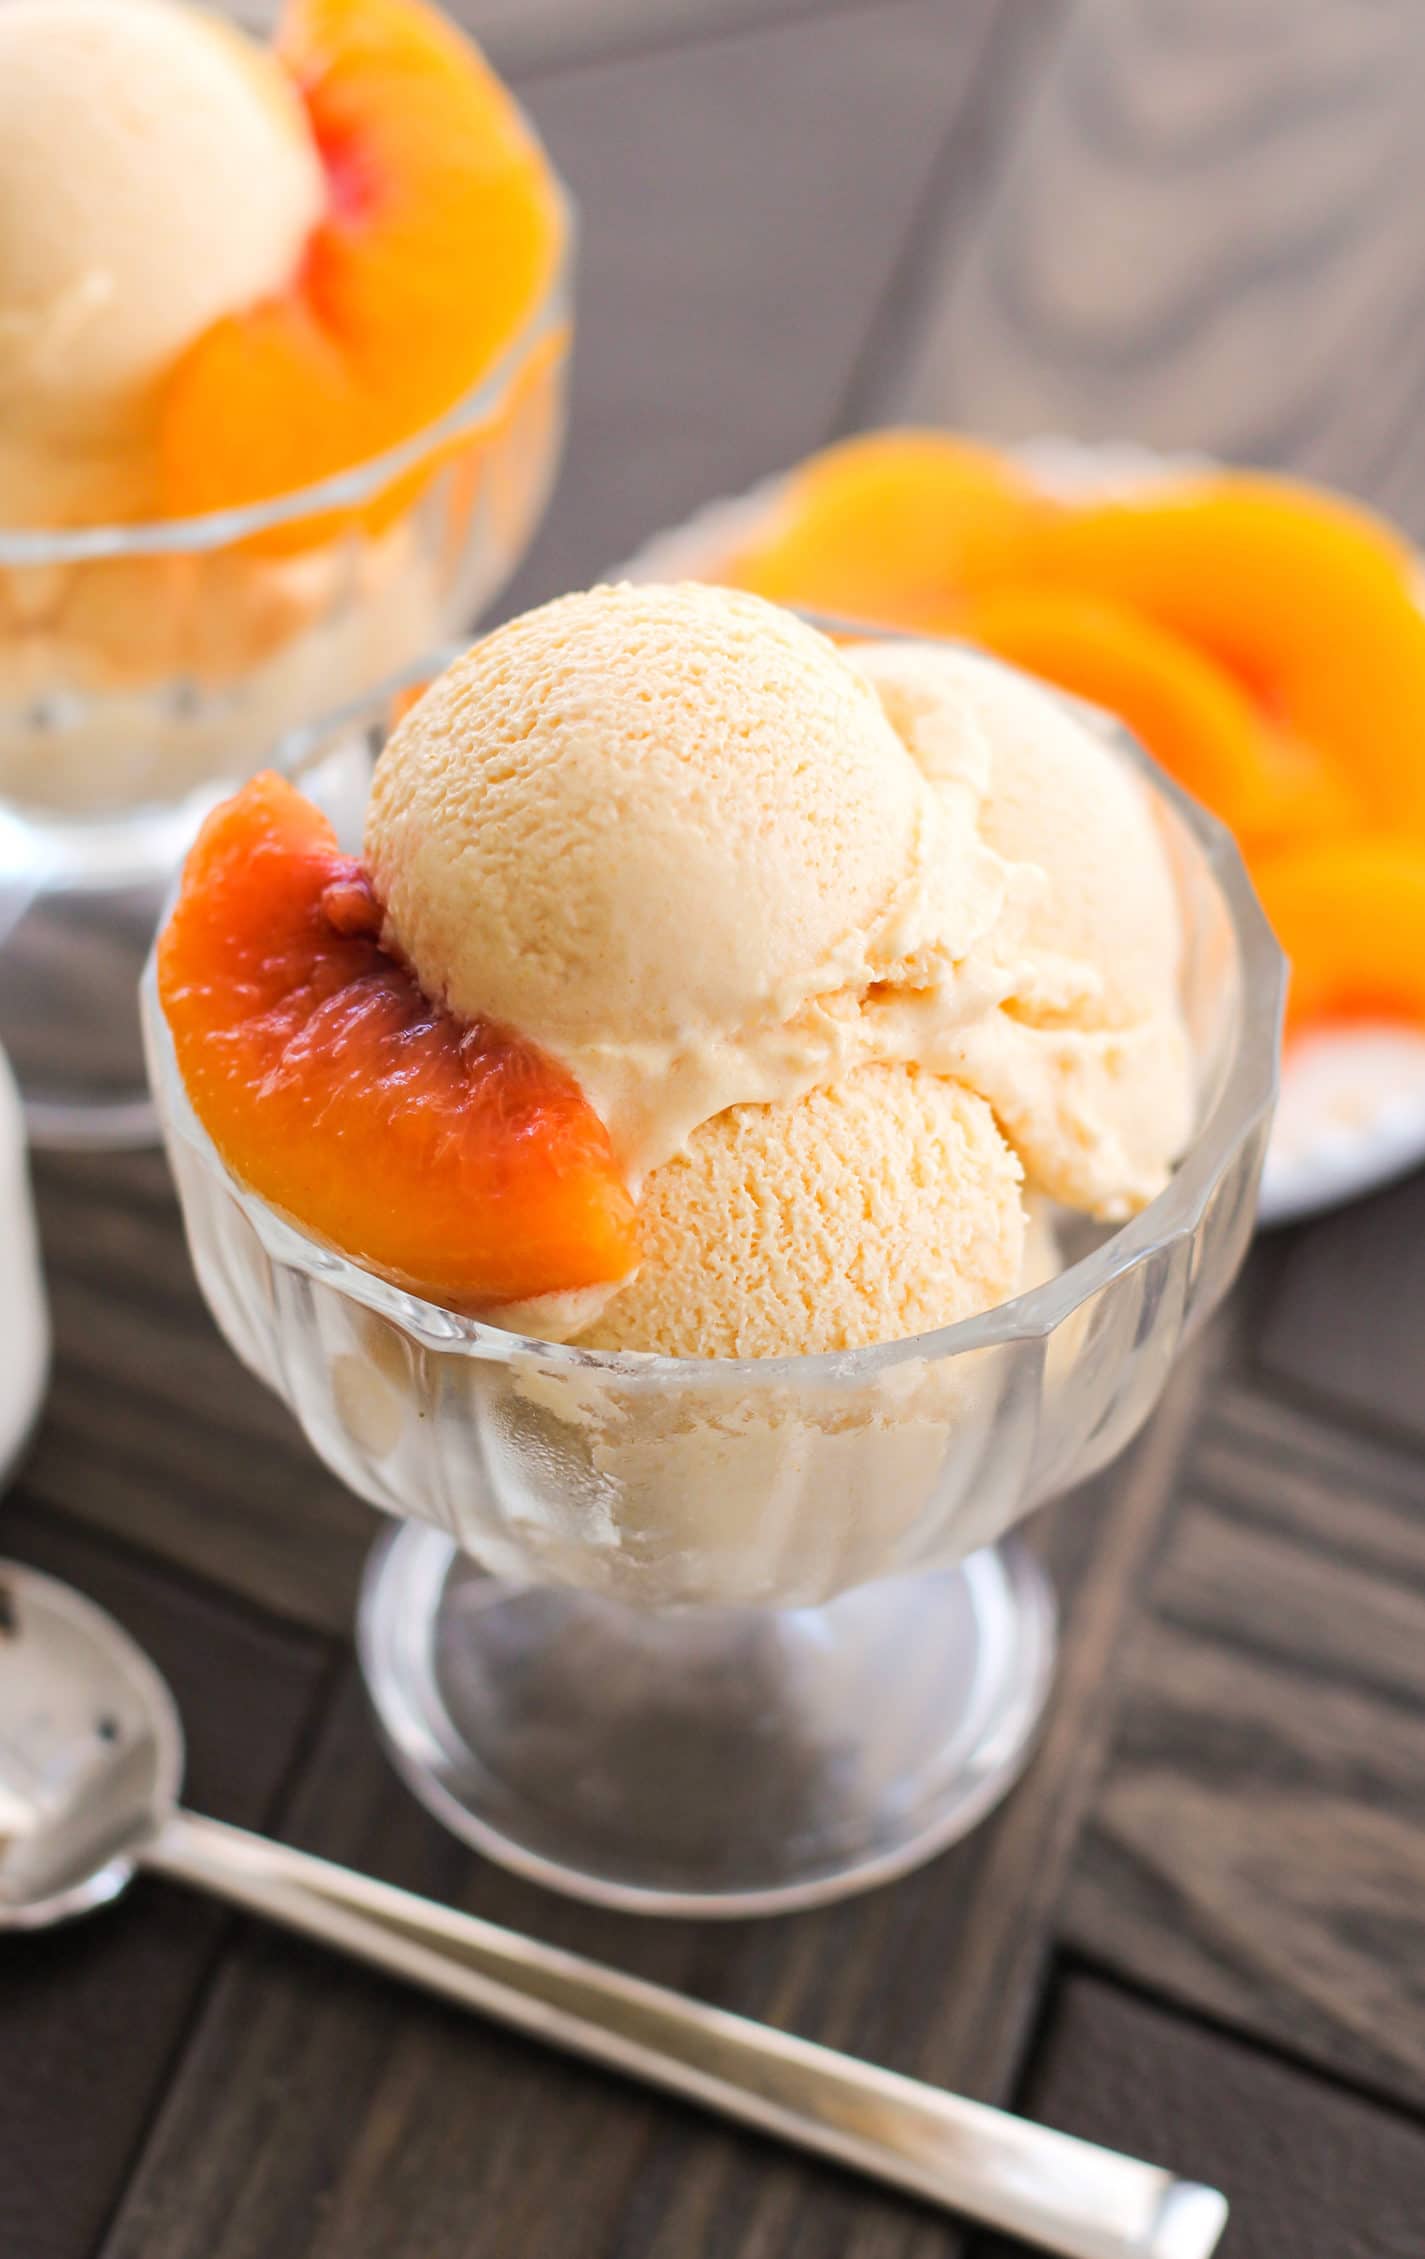 Healthy Peaches and Cream Ice Cream (refined sugar free) - Healthy Dessert Recipes at Desserts with Benefits